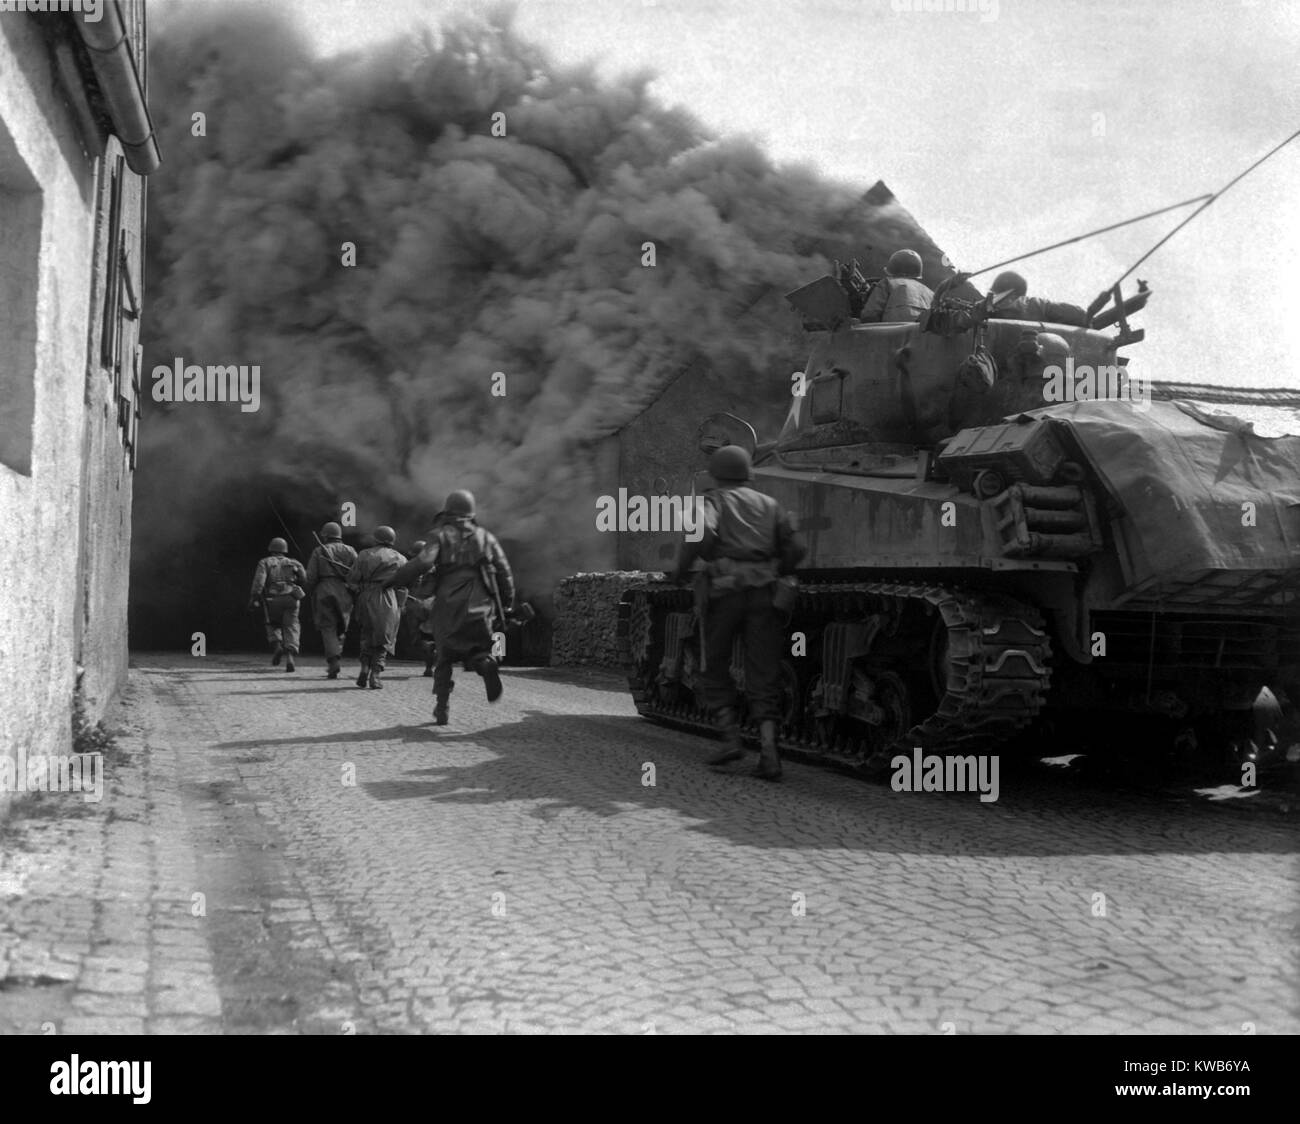 U.S. infantrymen running through the smoke-filled streets of Wernberg, Germany. 55th Armored Infantry Battalion and tank of the 22nd Tank Battalion. April 22, 1945. World War 2. (BSLOC 2014 8 78) Stock Photo